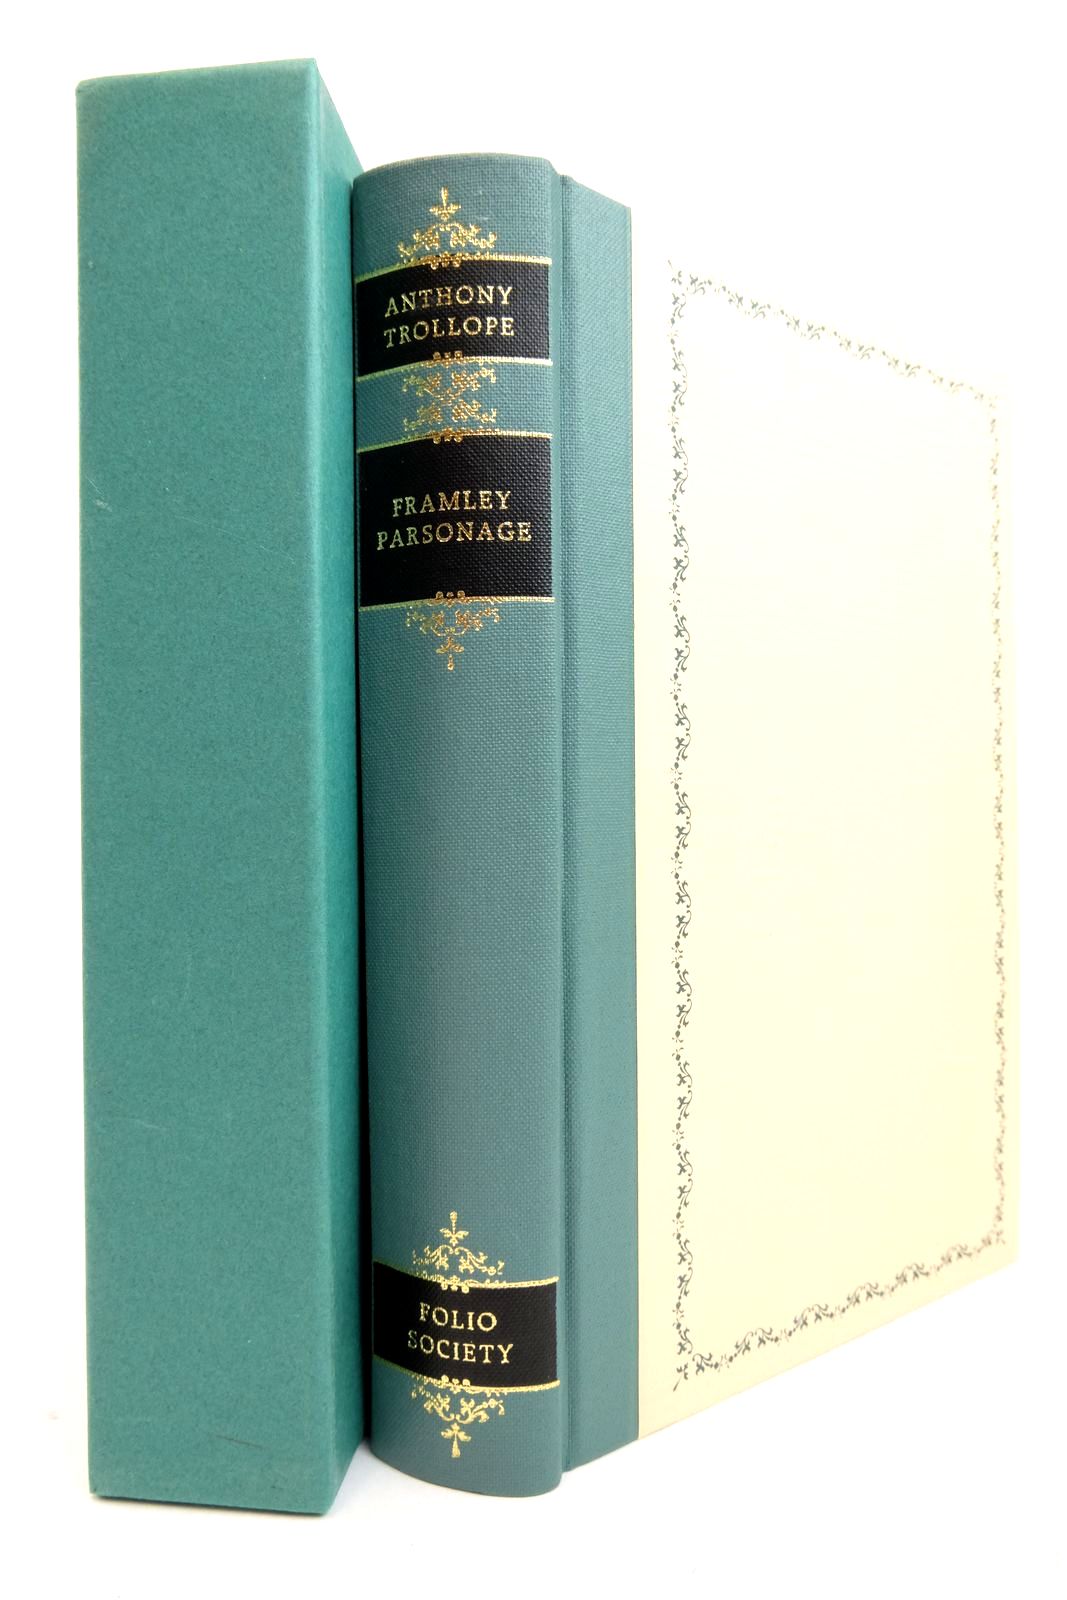 Photo of FRAMLEY PARSONAGE written by Trollope, Anthony Fraser, Antonia illustrated by Pendle, Alexy published by Folio Society (STOCK CODE: 2136872)  for sale by Stella & Rose's Books